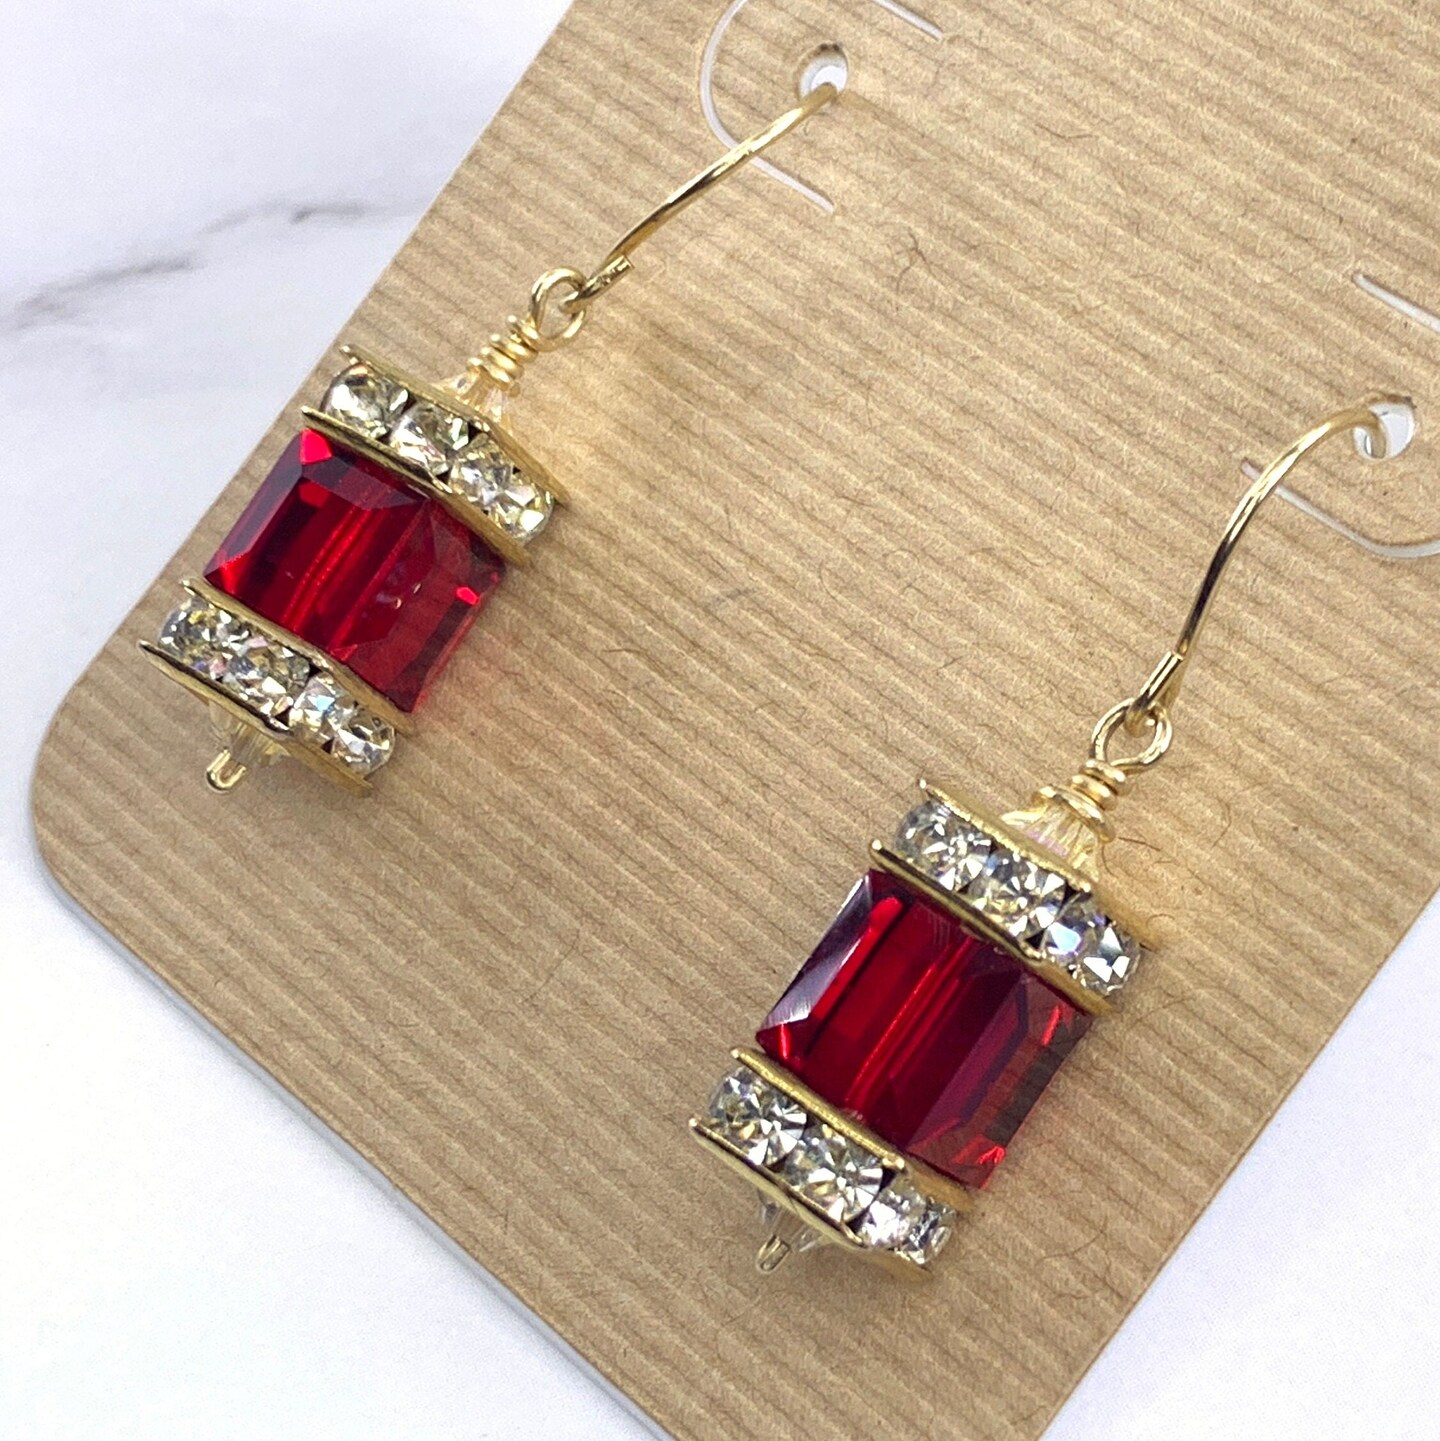 Amazon.com: Swarovski® Crystal Earrings, Siam Red, 10mm Cushion Cut, Deep  Rich Red, Drops or Studs, Assorted Finishes, Wedding Jewelry, Gift Packaged  : Handmade Products